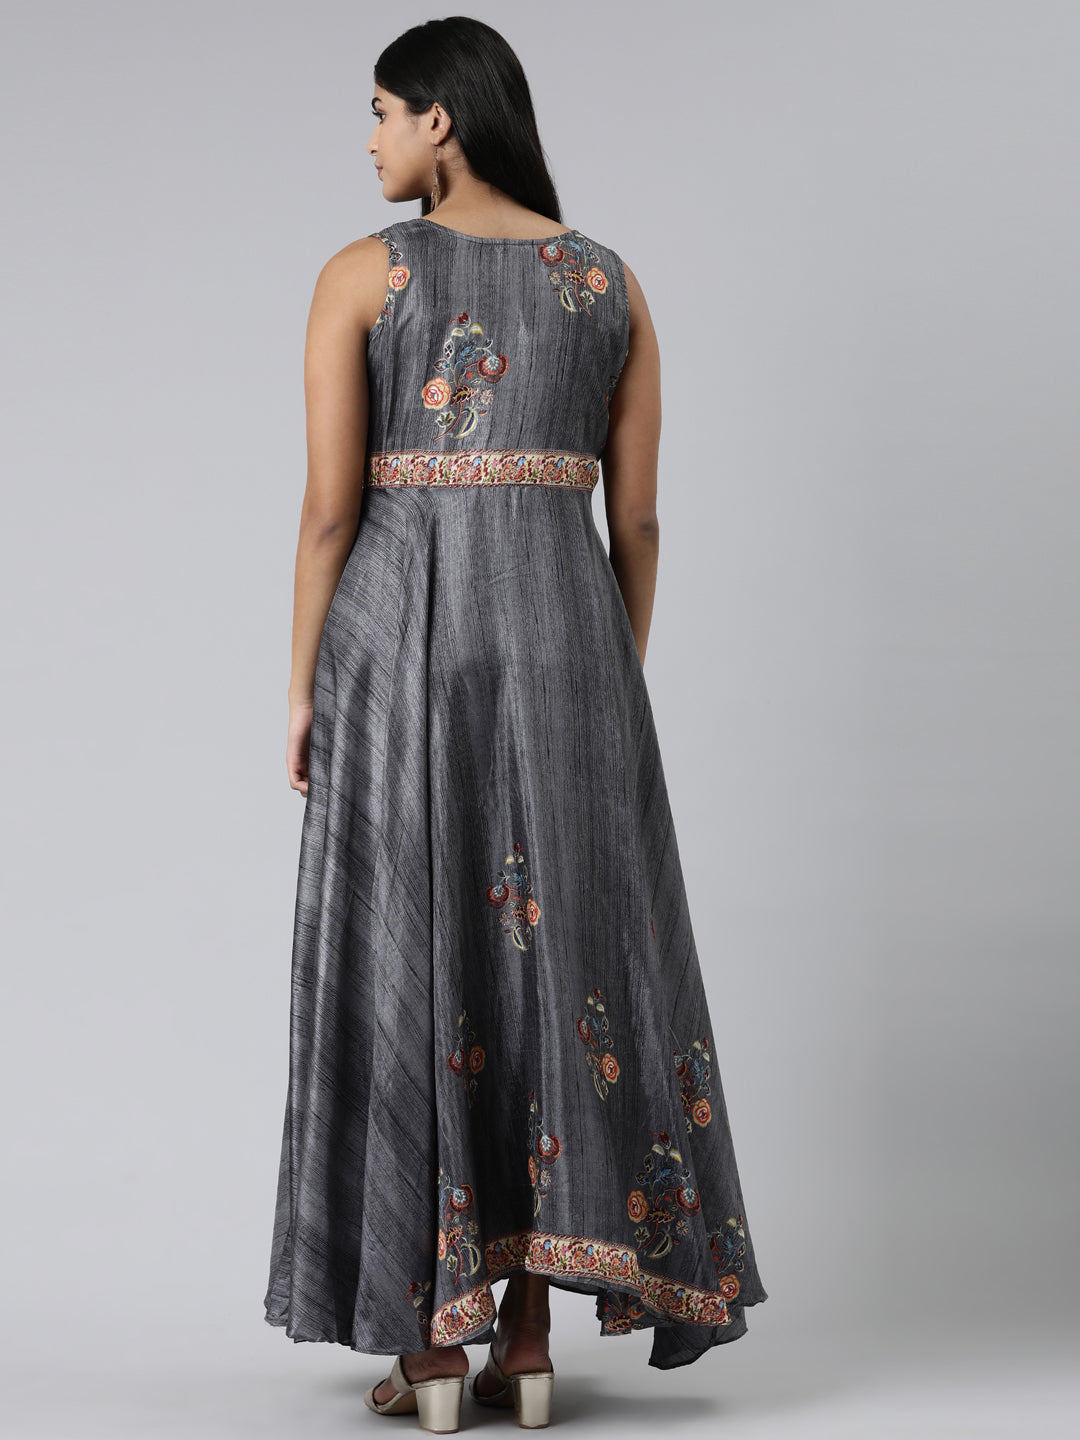 Neerus Grey Curved Casual Embroidered Maxi Dress